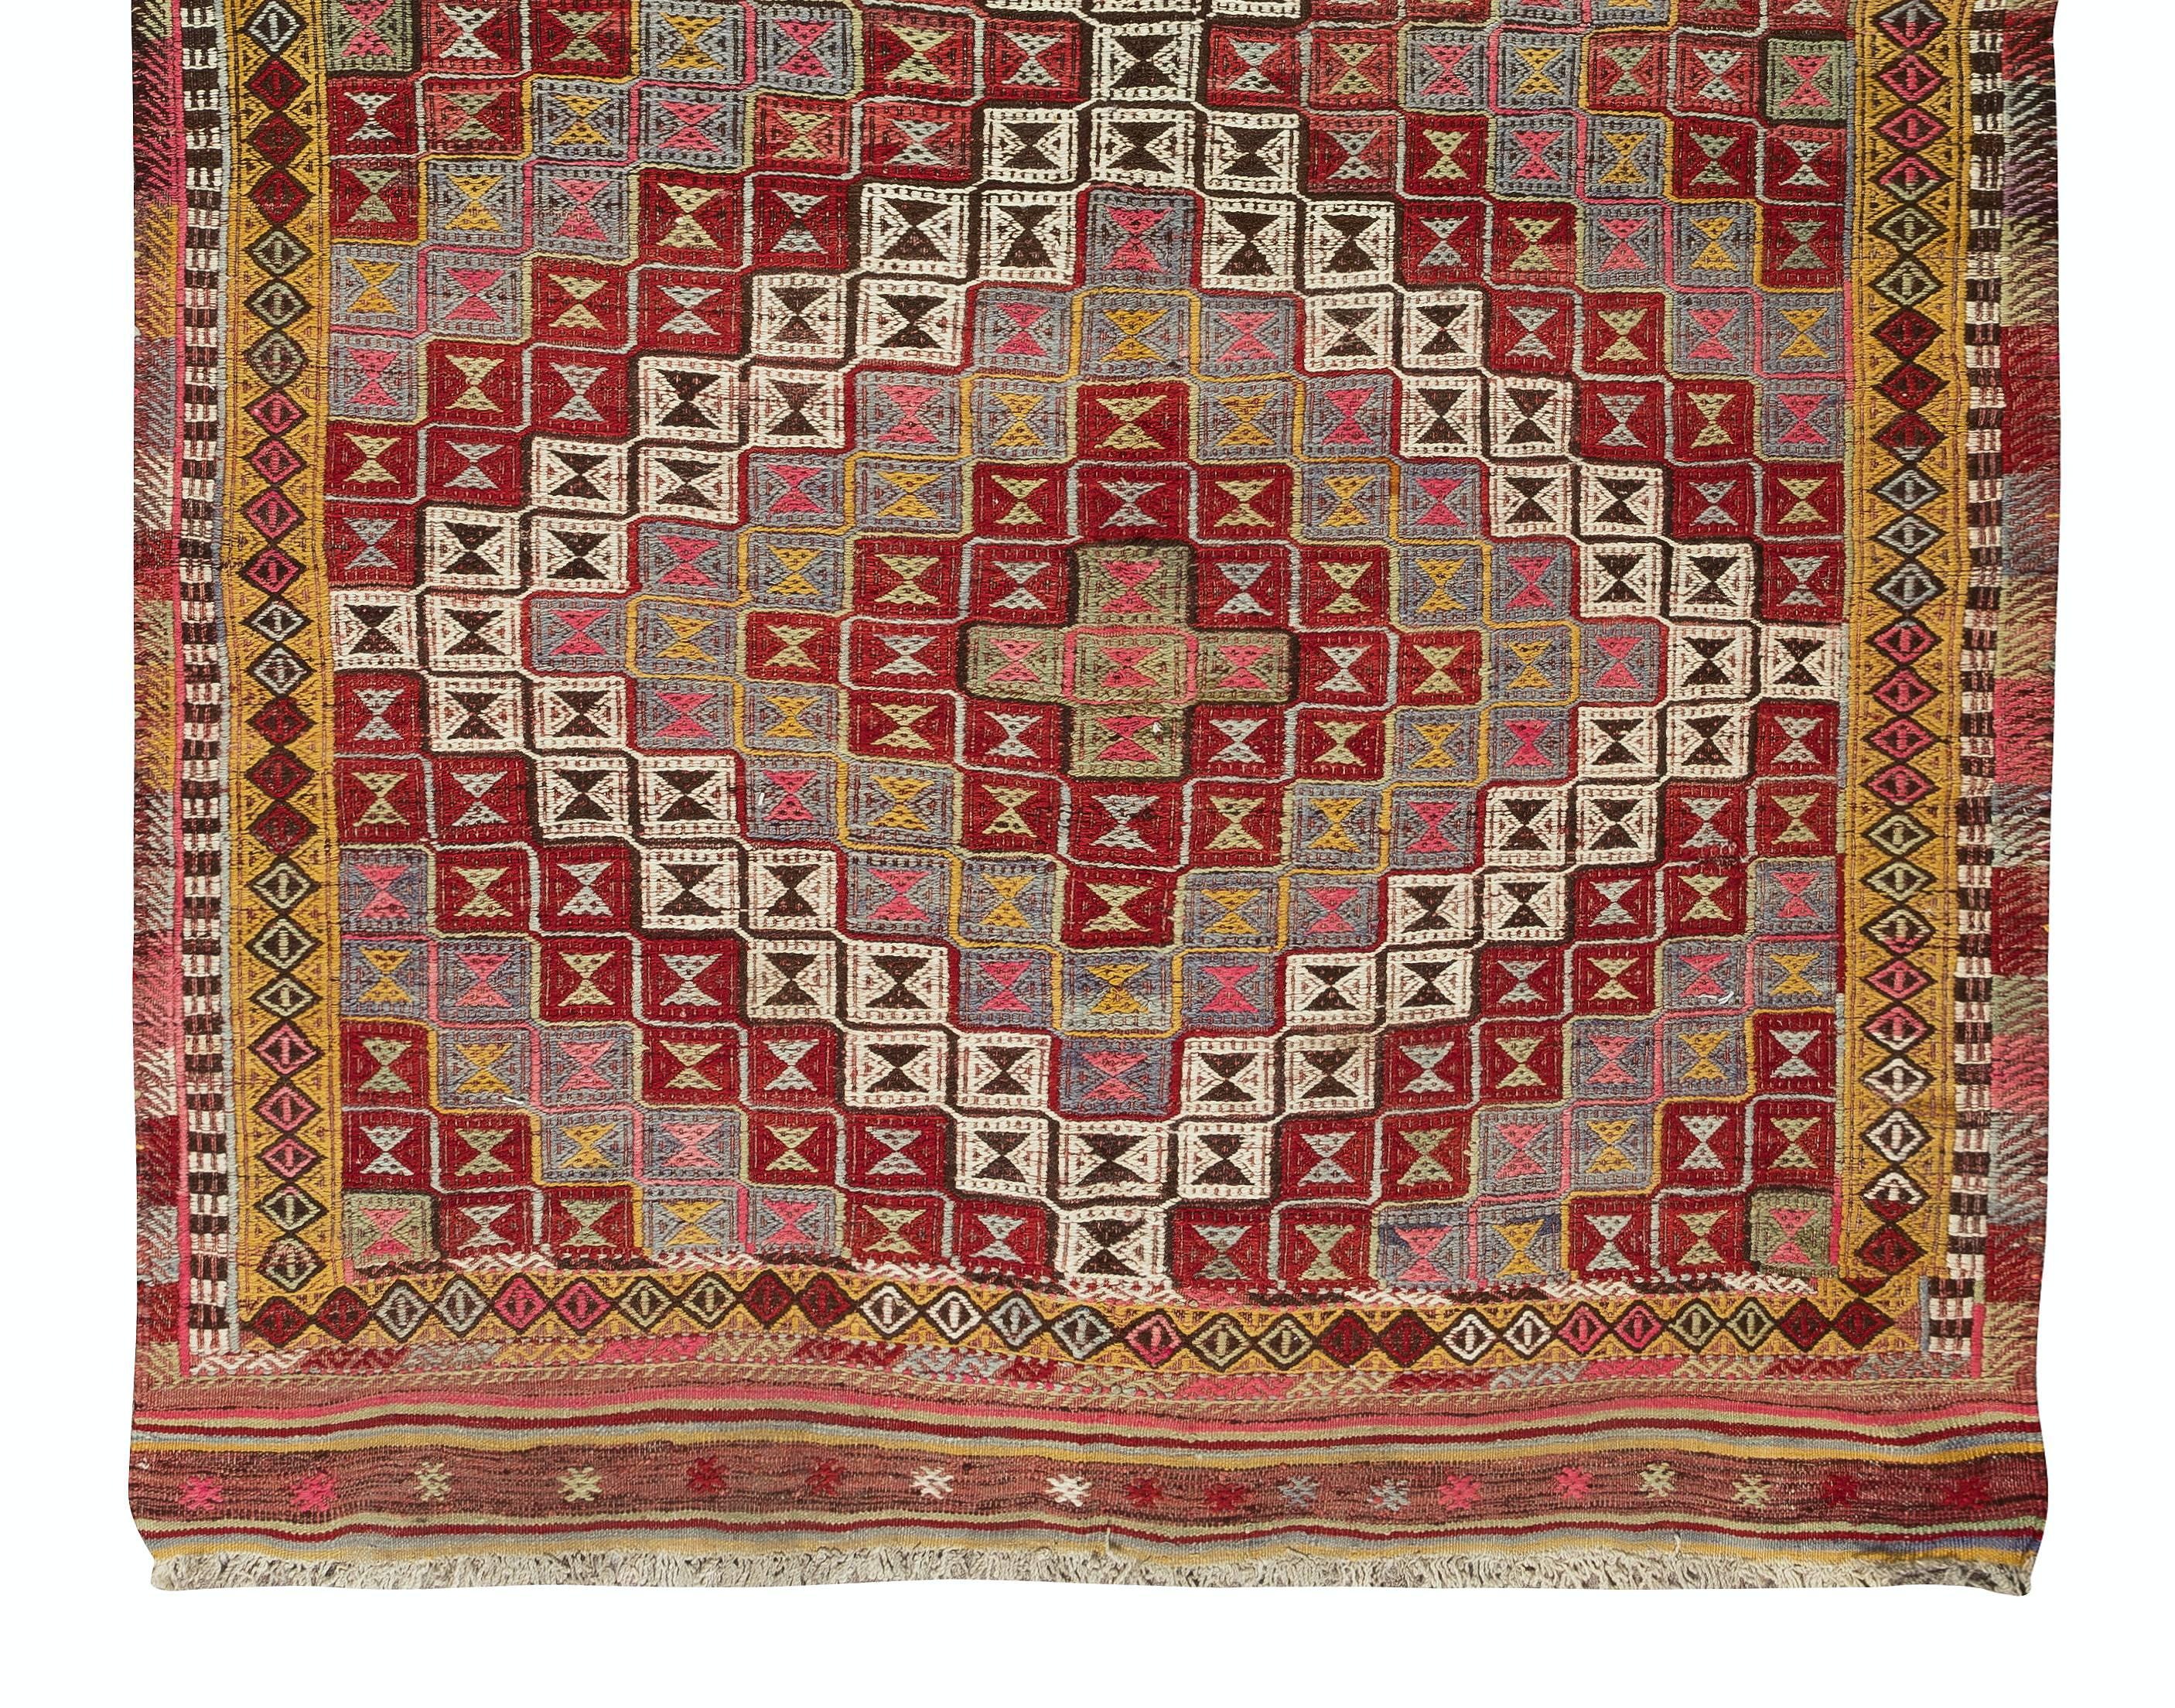 20th Century 5.3x8.3 Ft One-of-a-Kind Geometric Vintage Turkish Jijim Kilim Rug Made of Wool For Sale